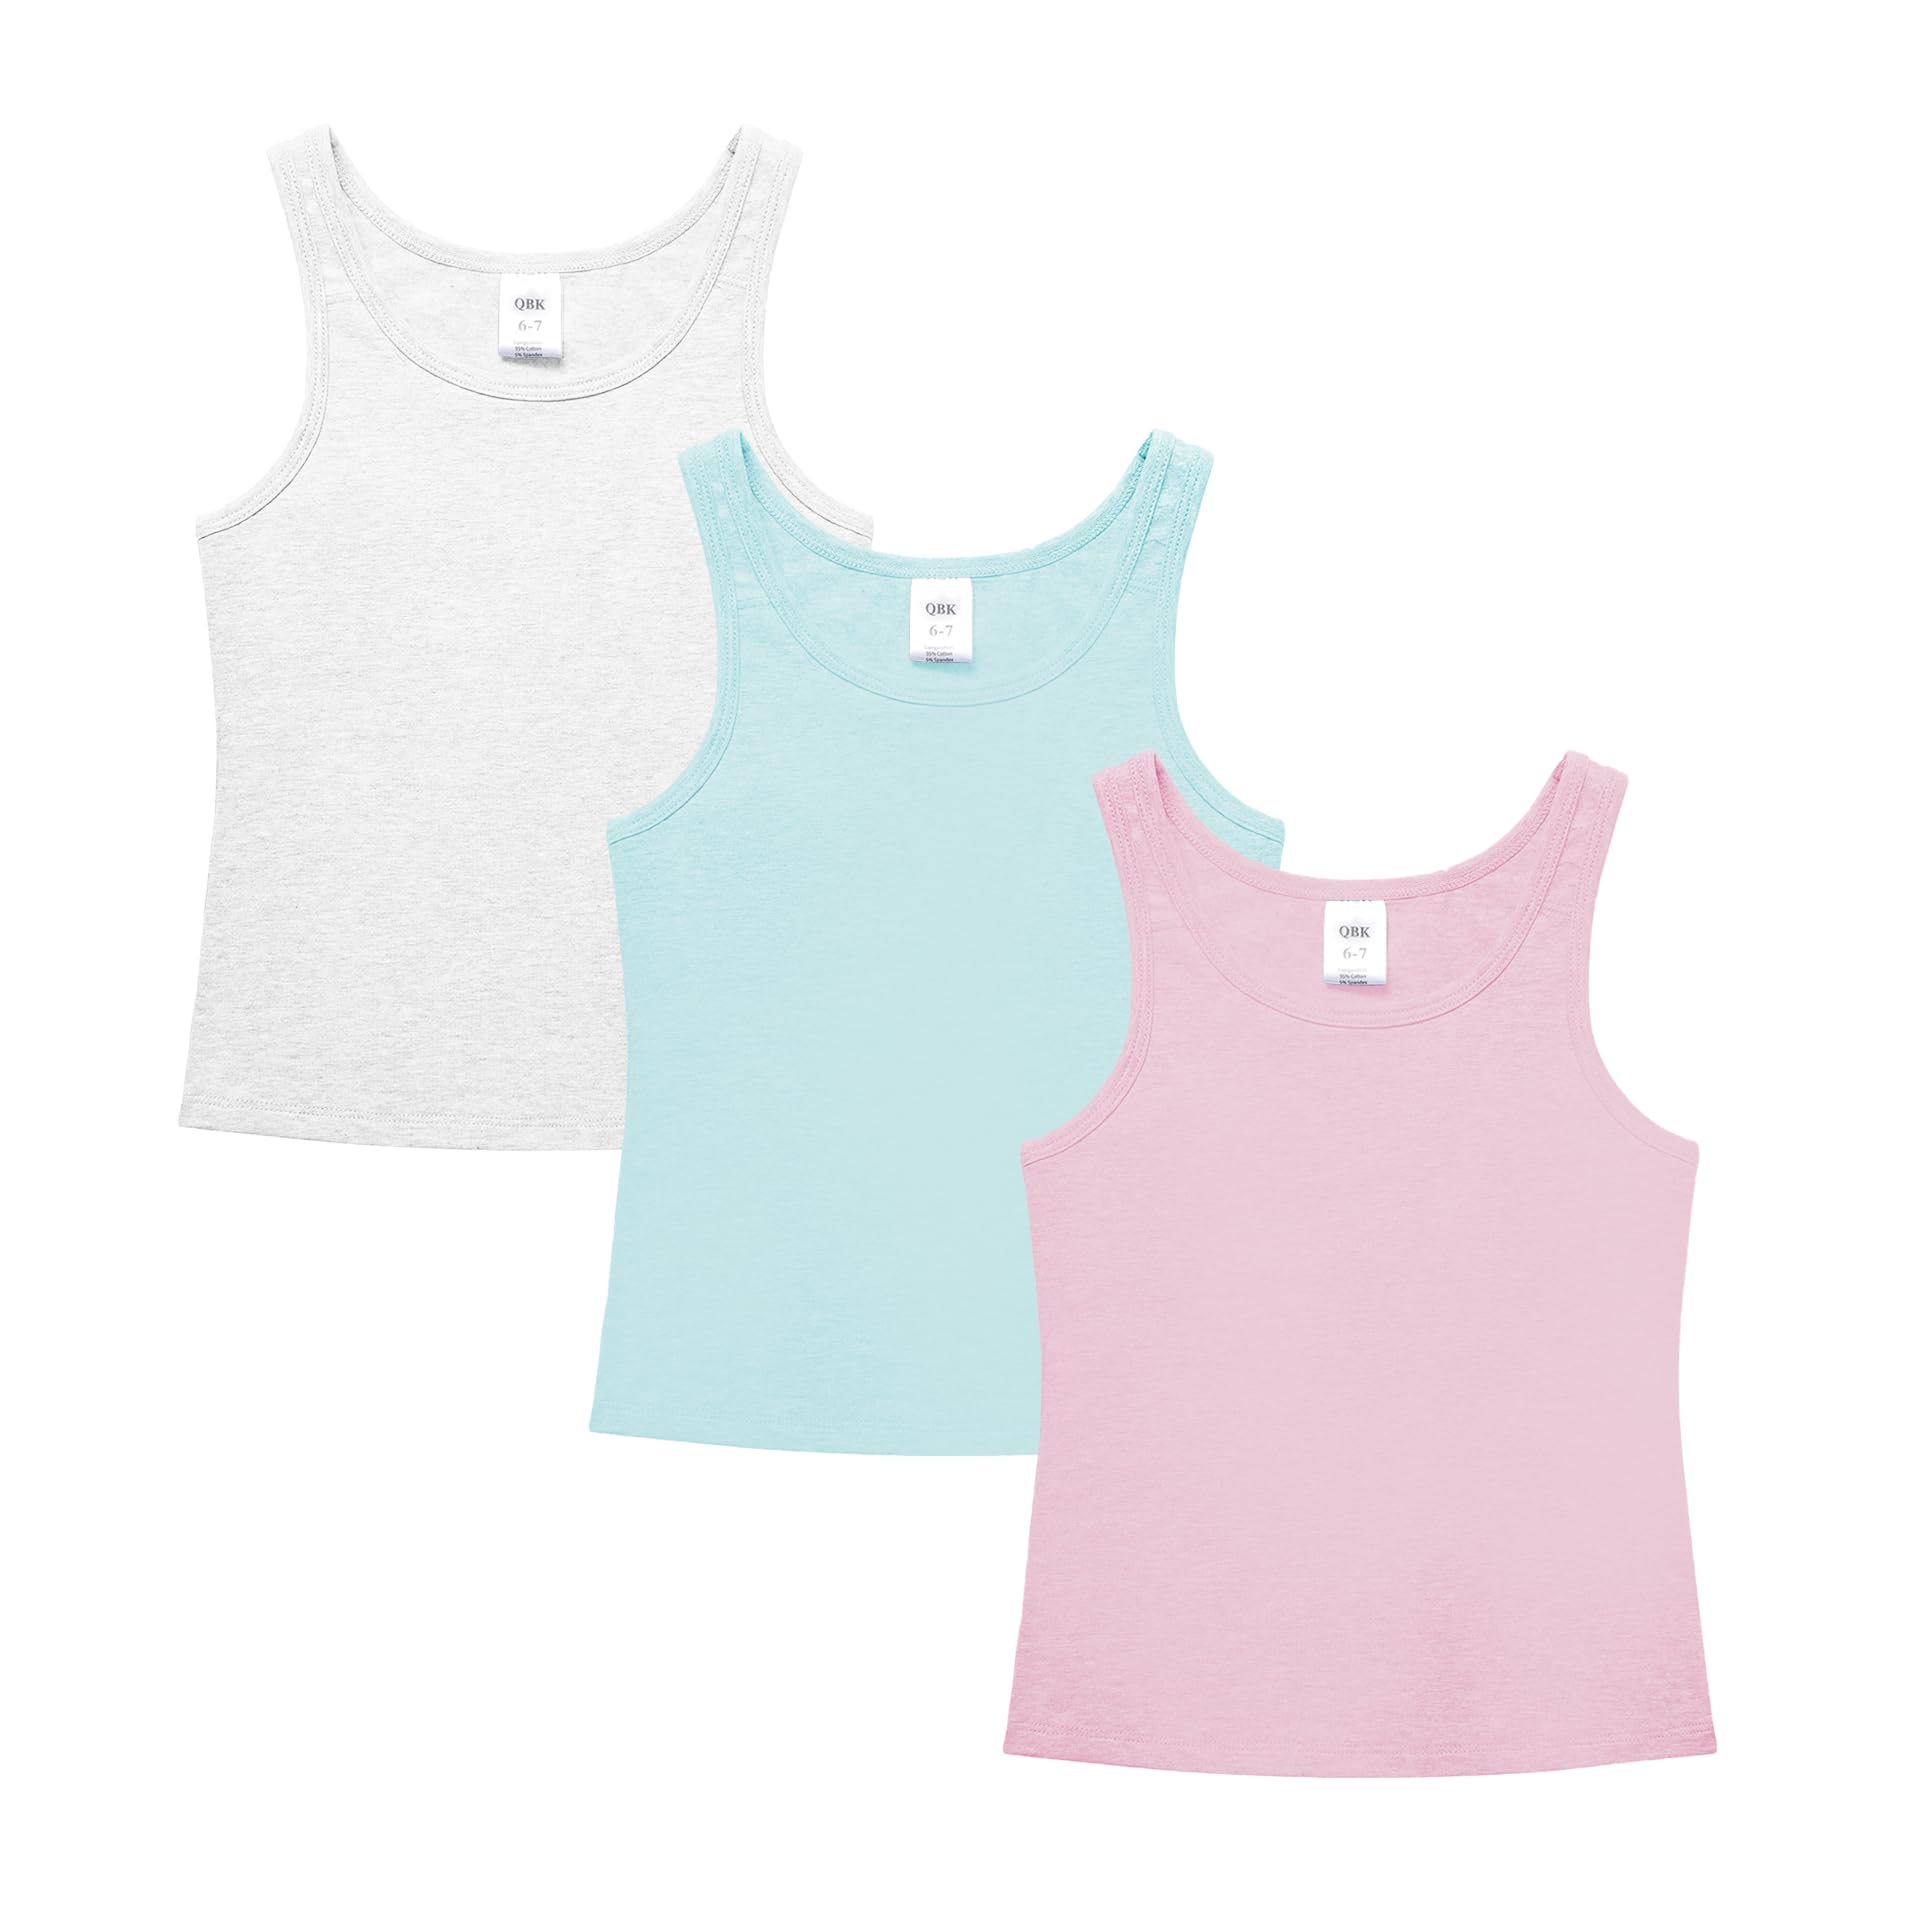 Buy QBK Training Bras for Teens Girls from 6 7 8 9 10 12 Years Old